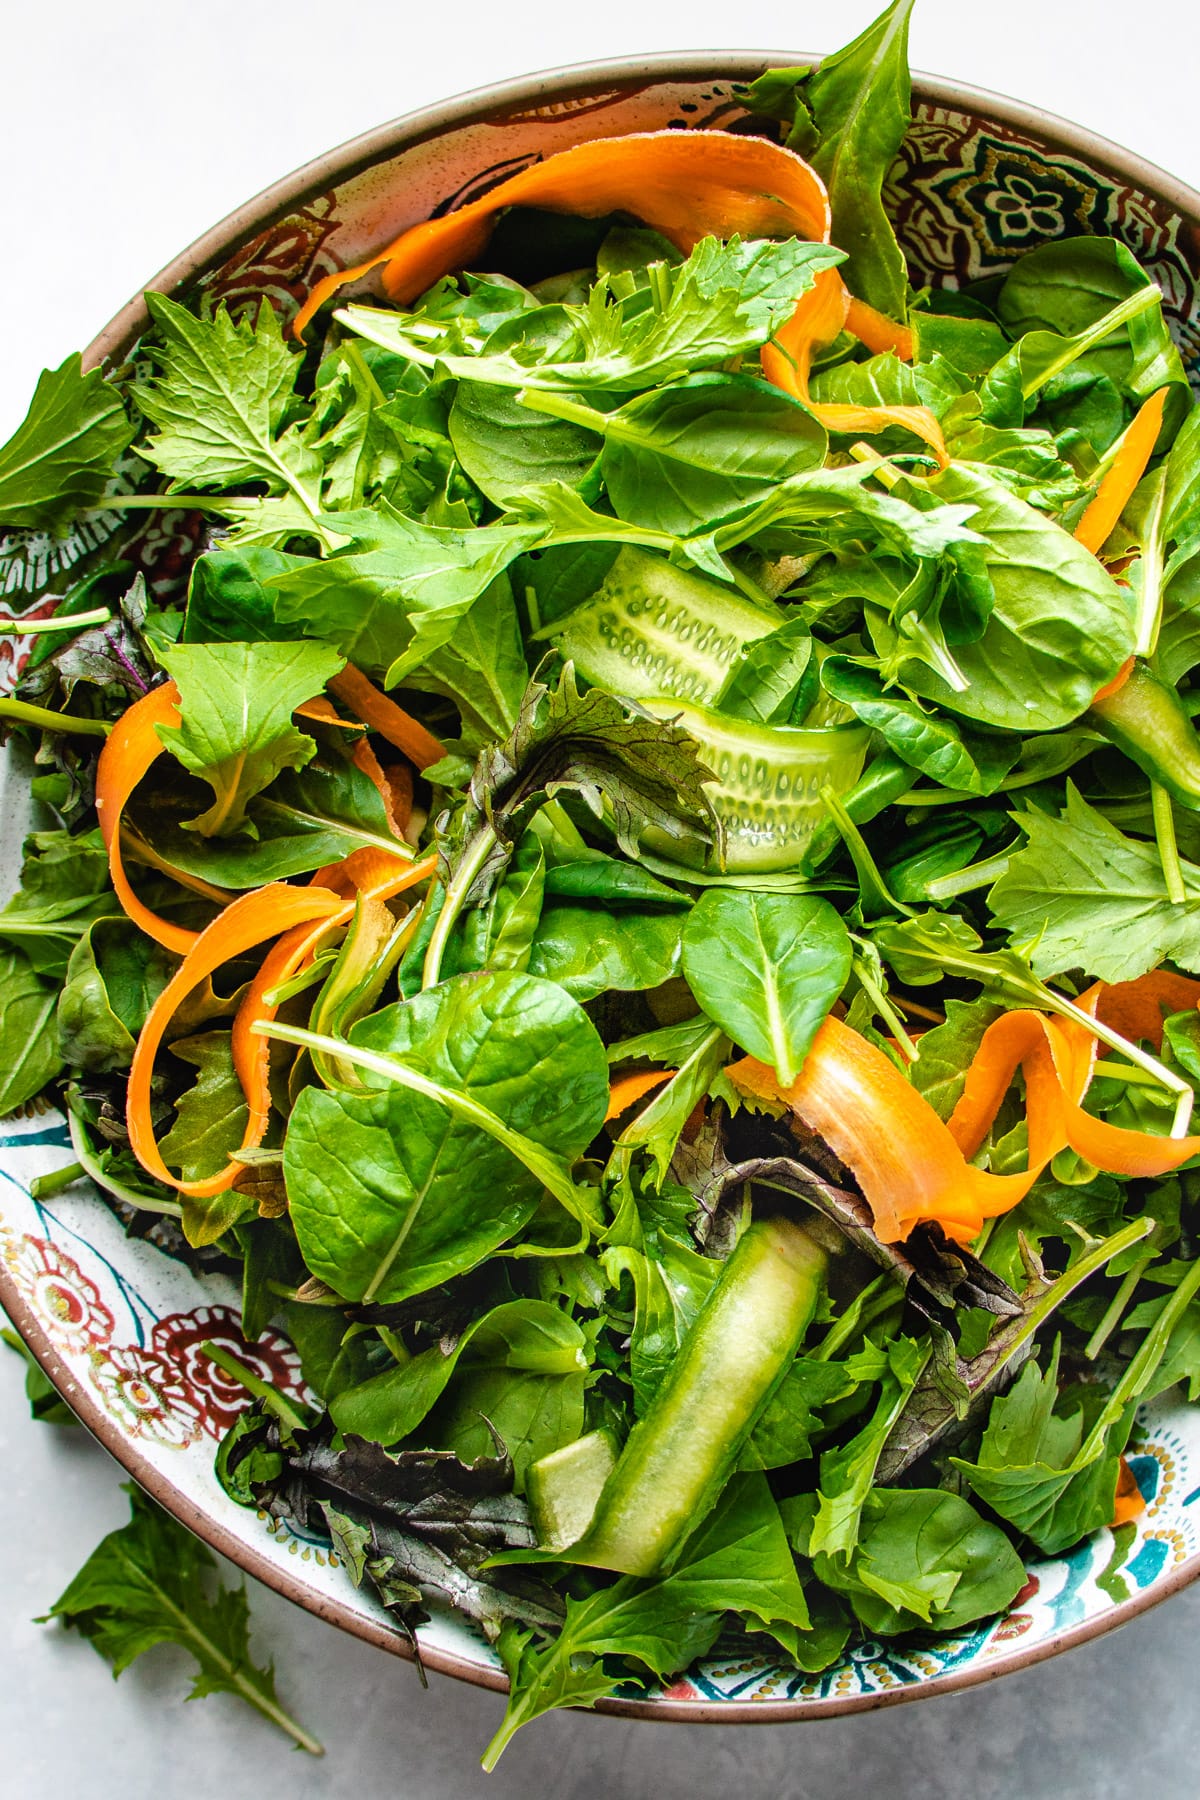 Photo shows a big bowl of fresh Asian salad greens with baby tatsoi lettuce mixed in a large bowl.